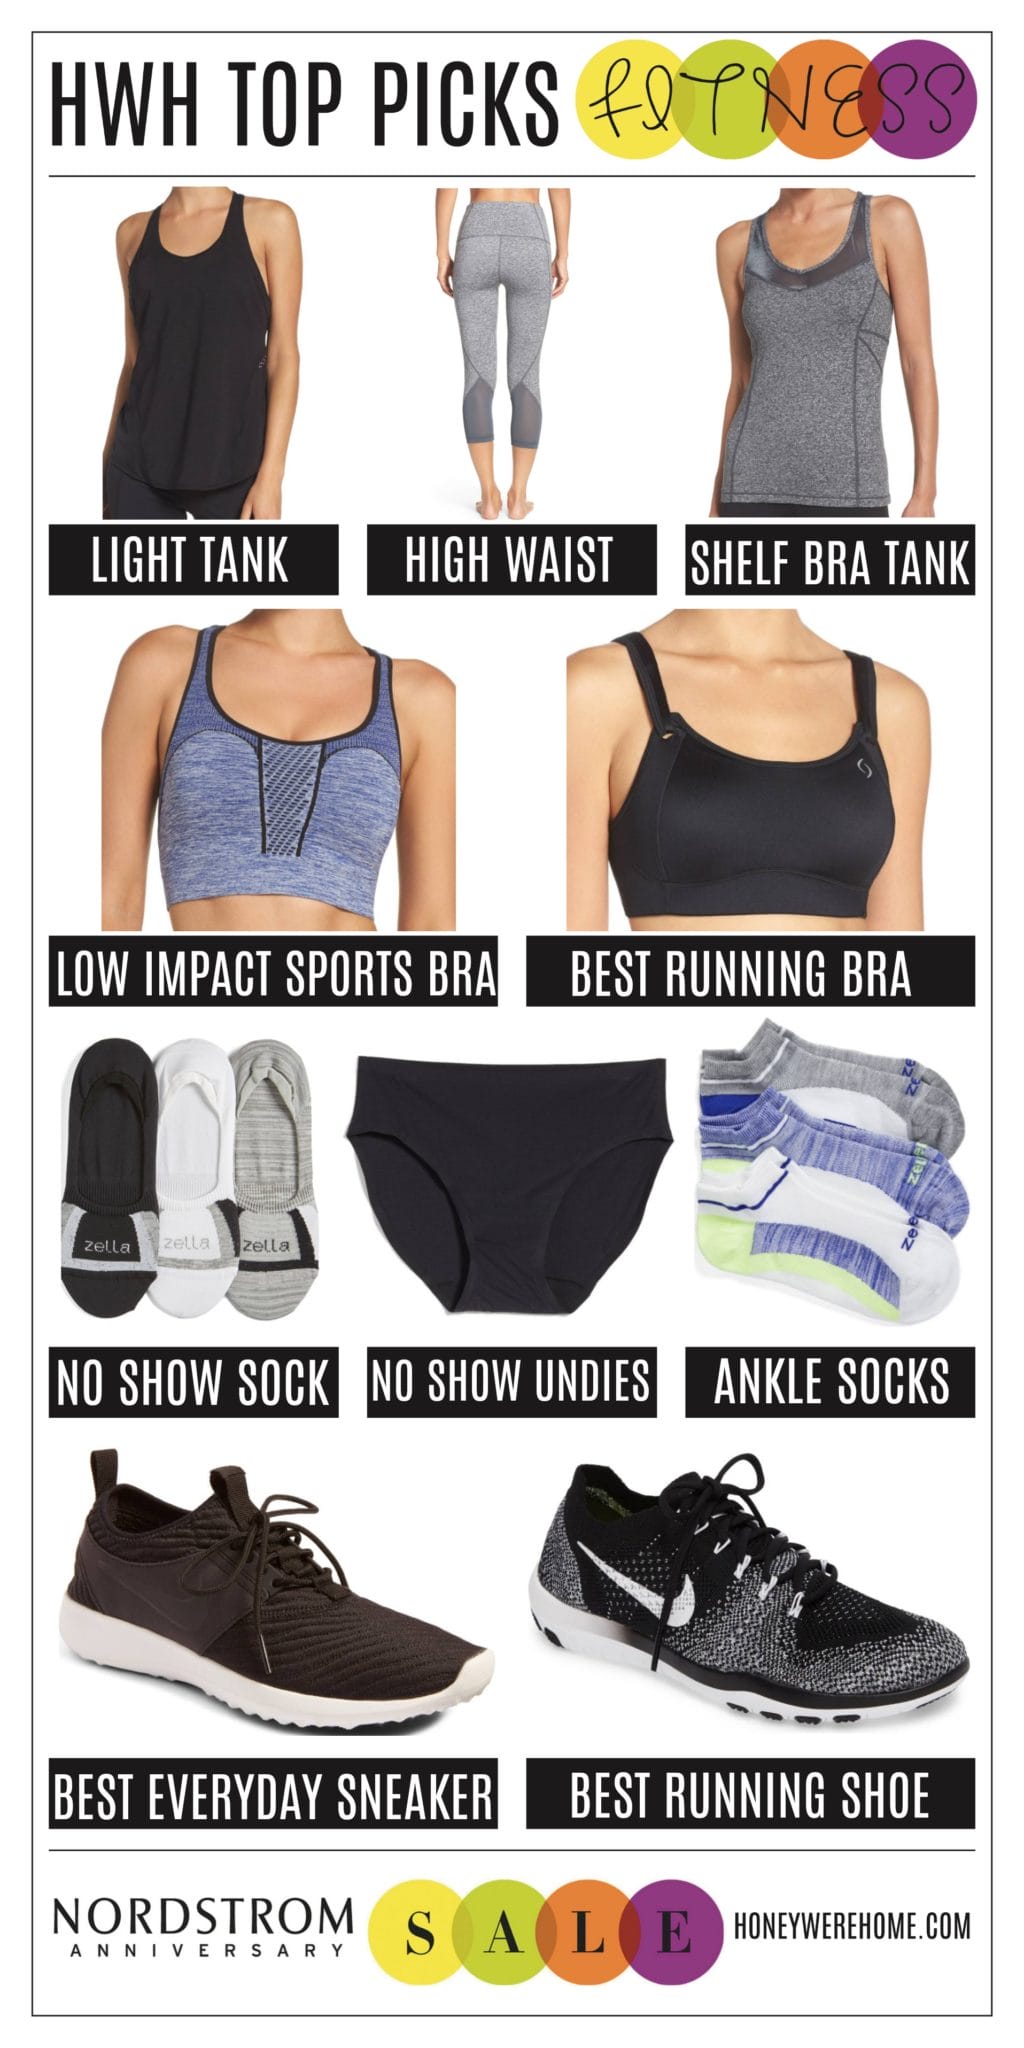 HWH Nordstrom Sale 2017 Fitness 